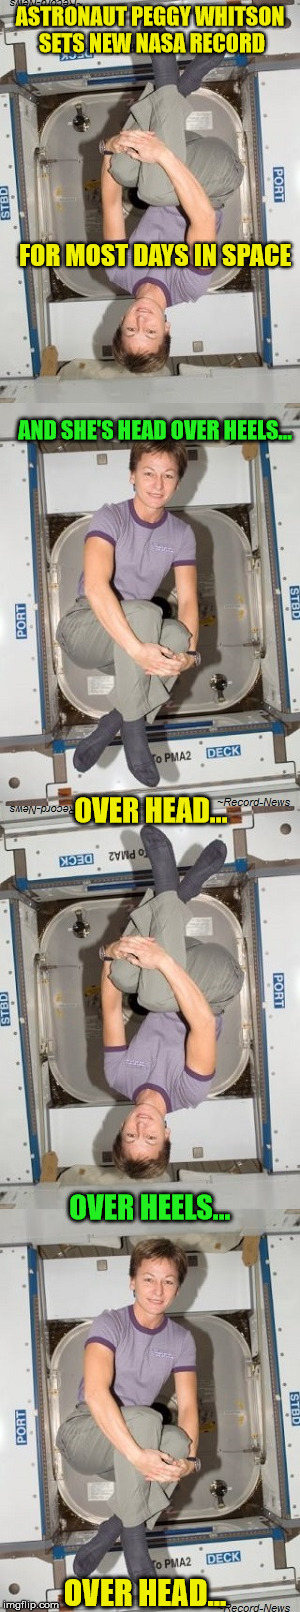 Okay! You get the idea | ASTRONAUT PEGGY WHITSON SETS NEW NASA RECORD; FOR MOST DAYS IN SPACE; AND SHE'S HEAD OVER HEELS... OVER HEAD... OVER HEELS... OVER HEAD... | image tagged in nasa,space,international space station | made w/ Imgflip meme maker